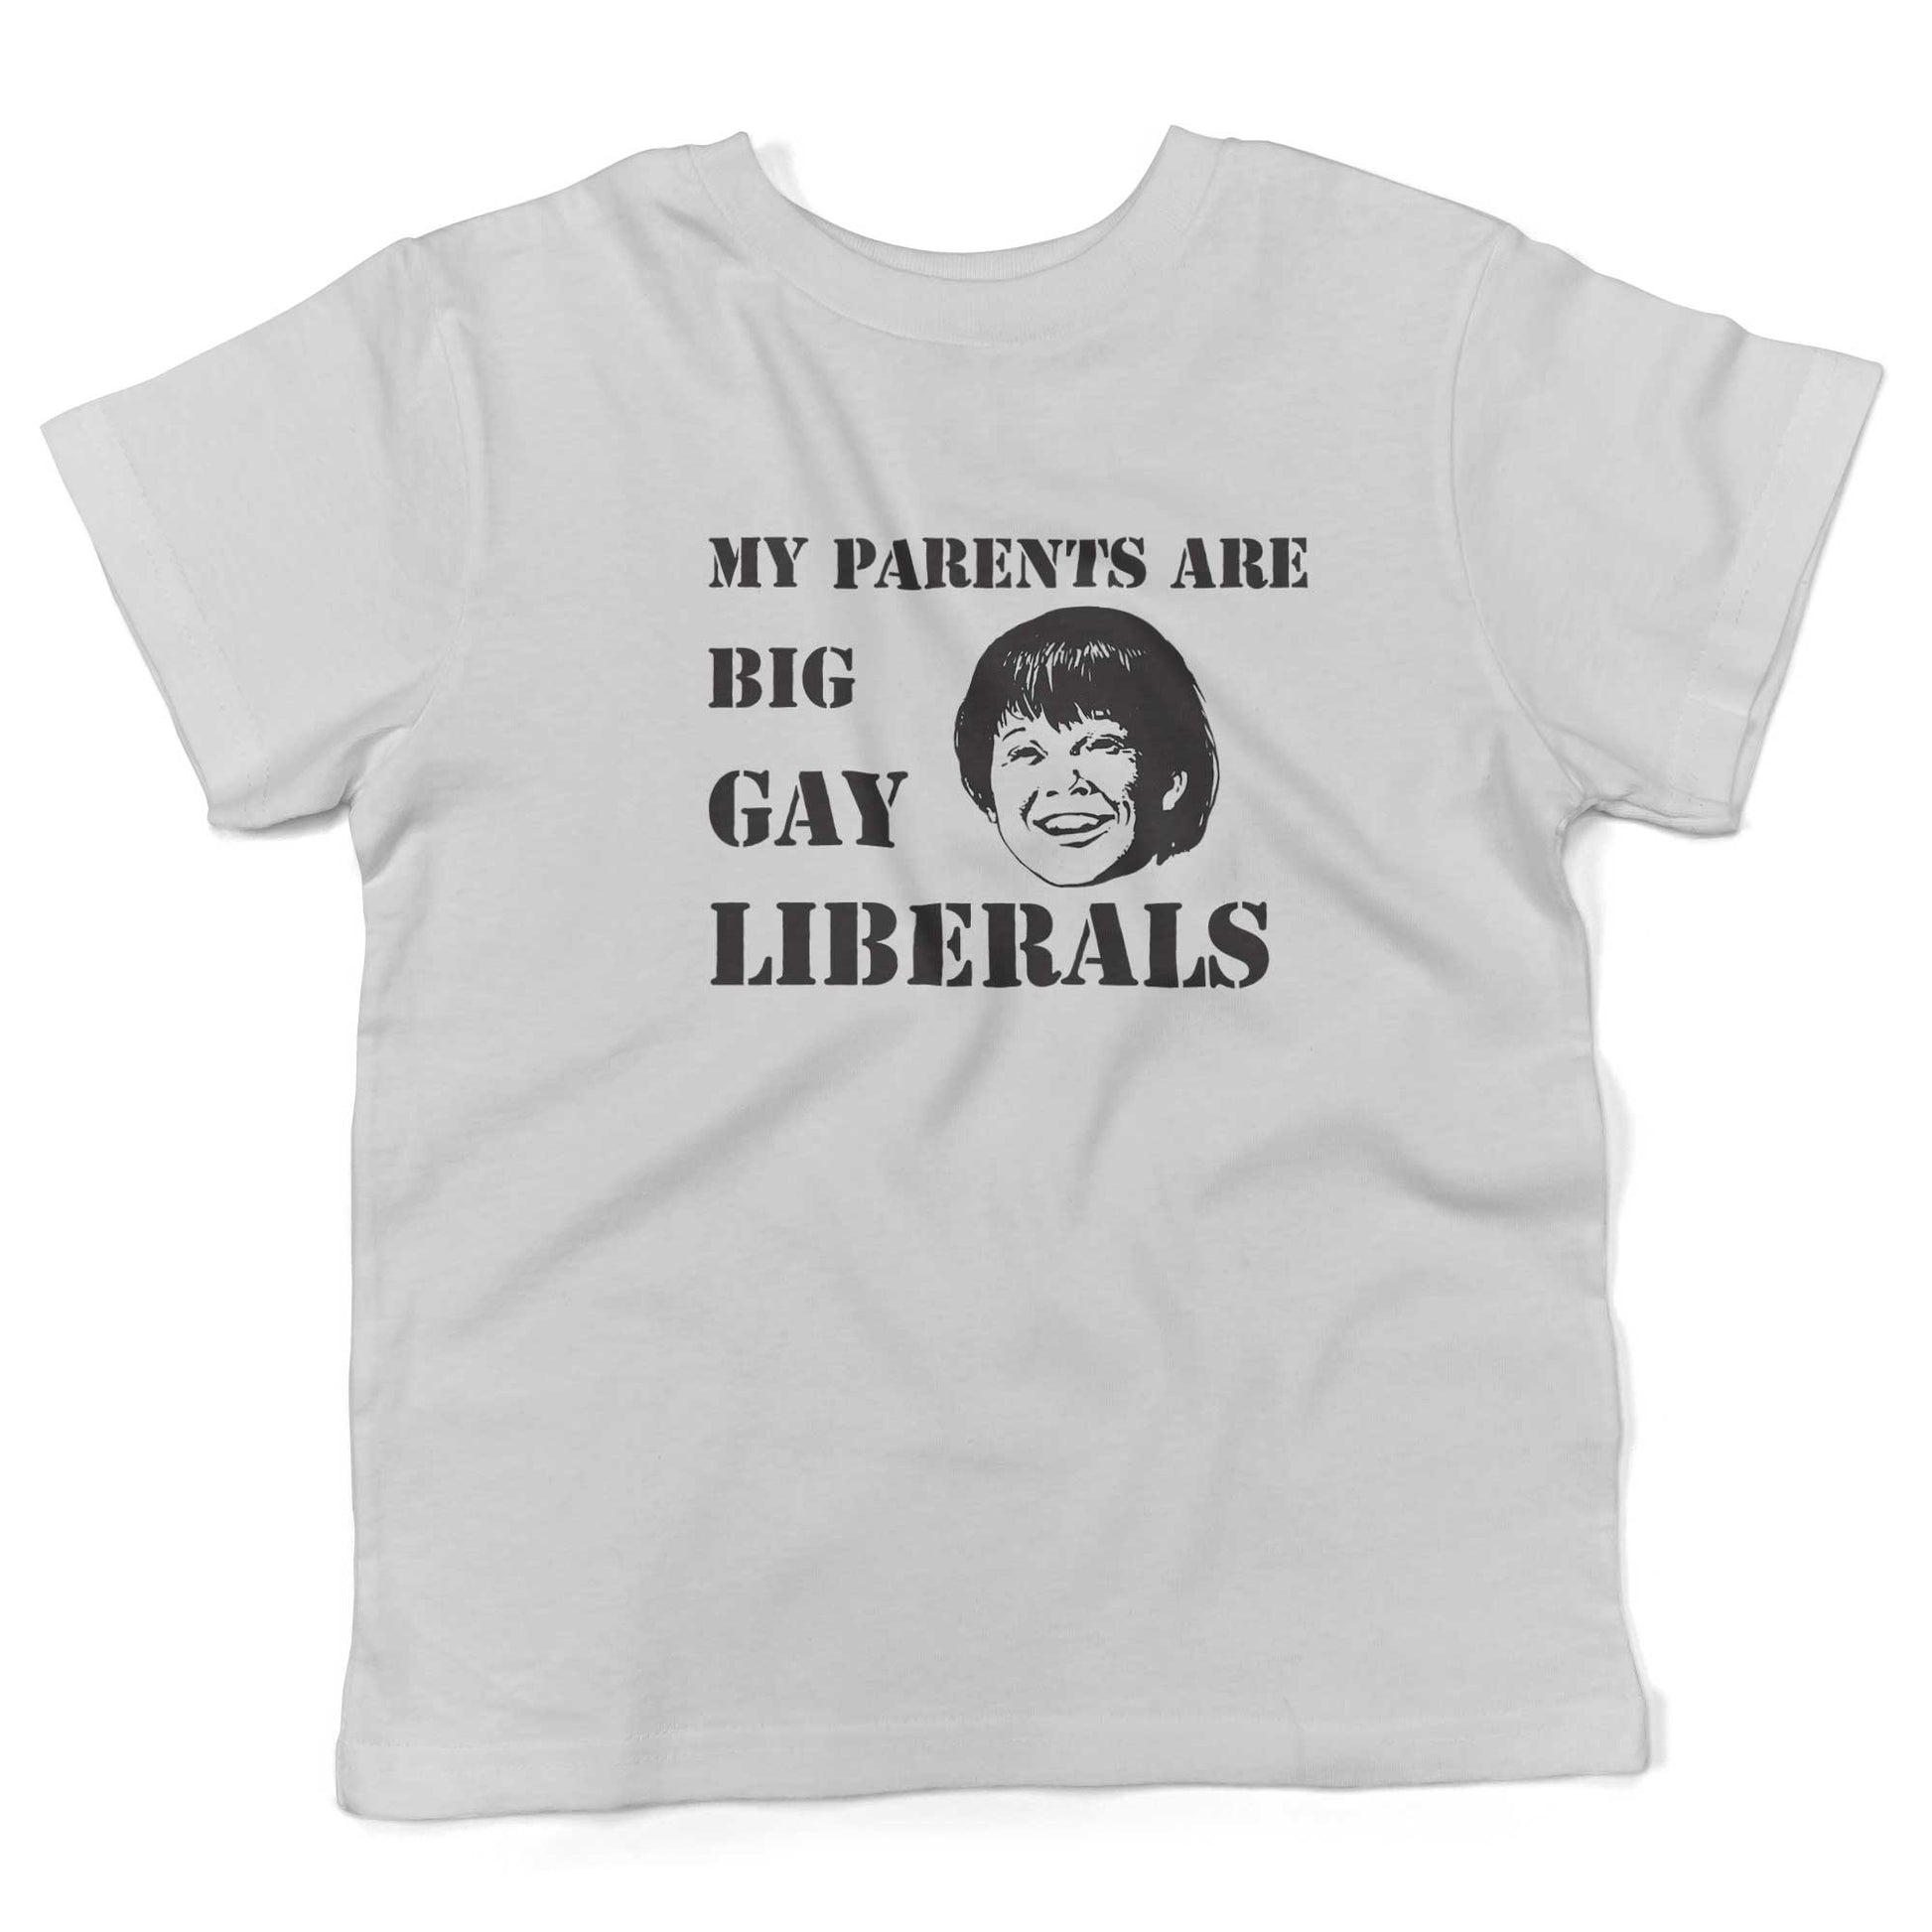 My Parents Are Big, Gay Liberals Toddler Shirt-White-2T